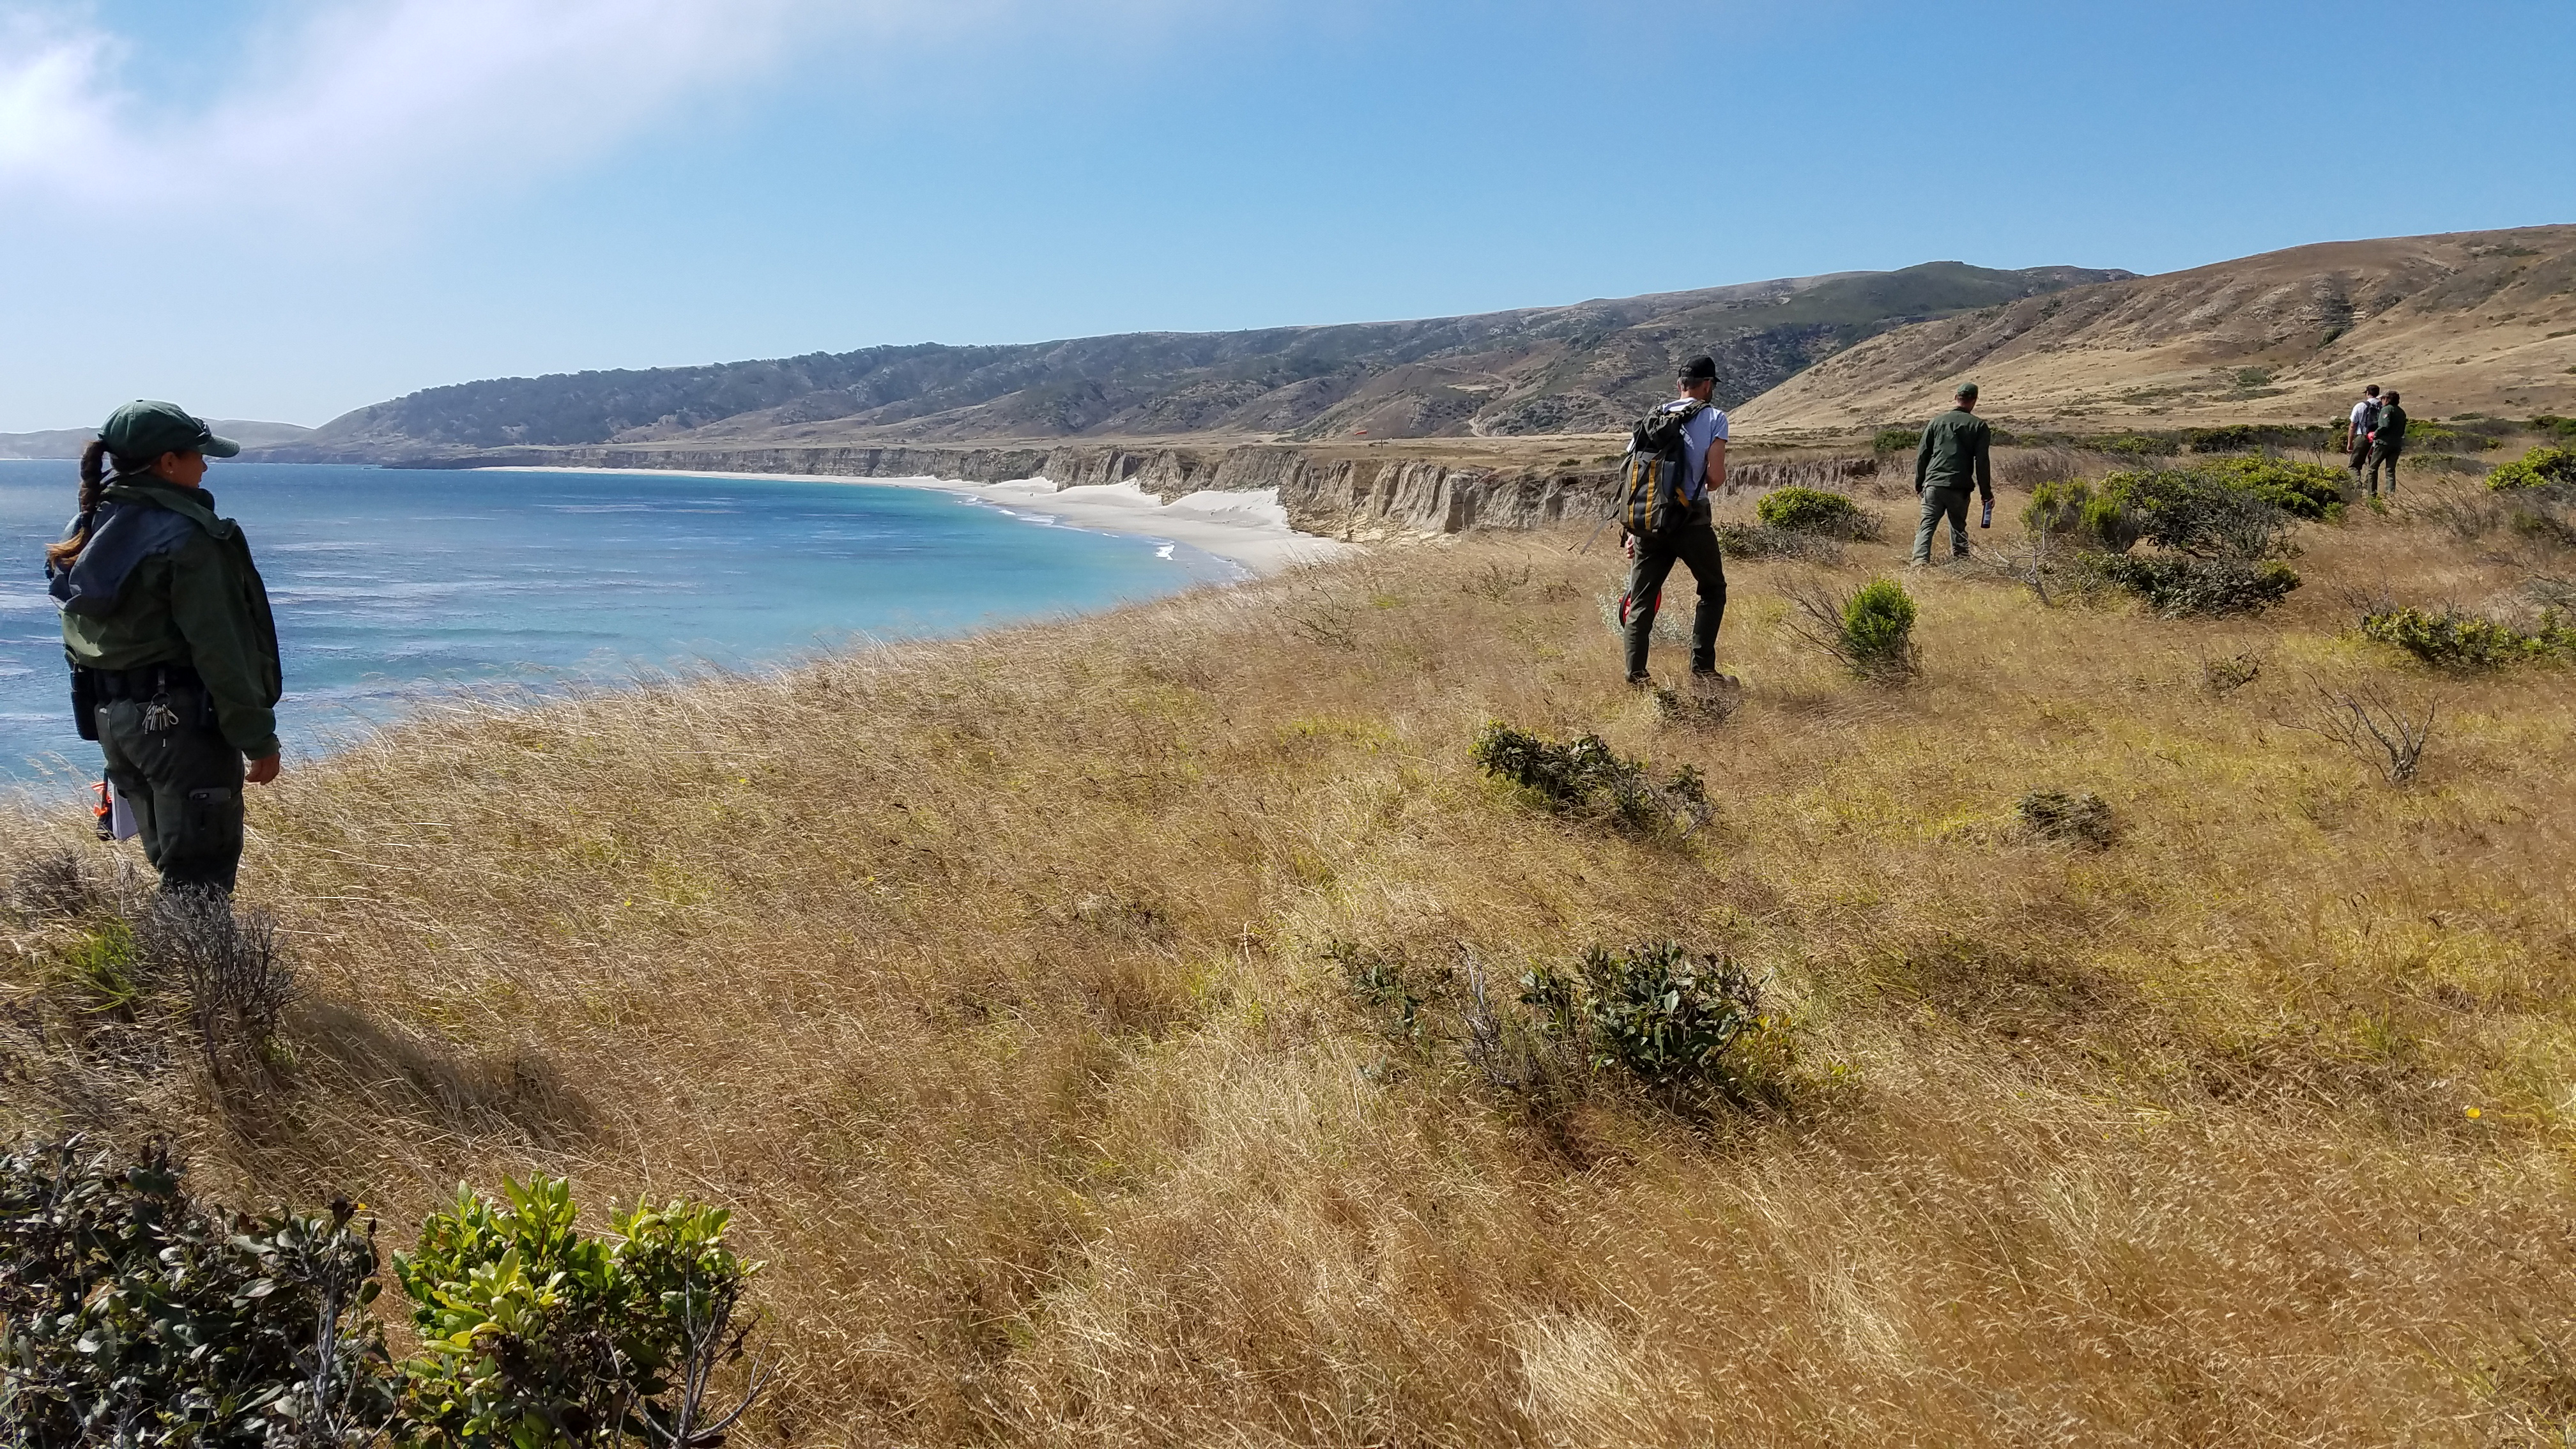 hikers on low coastal bluff overlooking white sand beach.